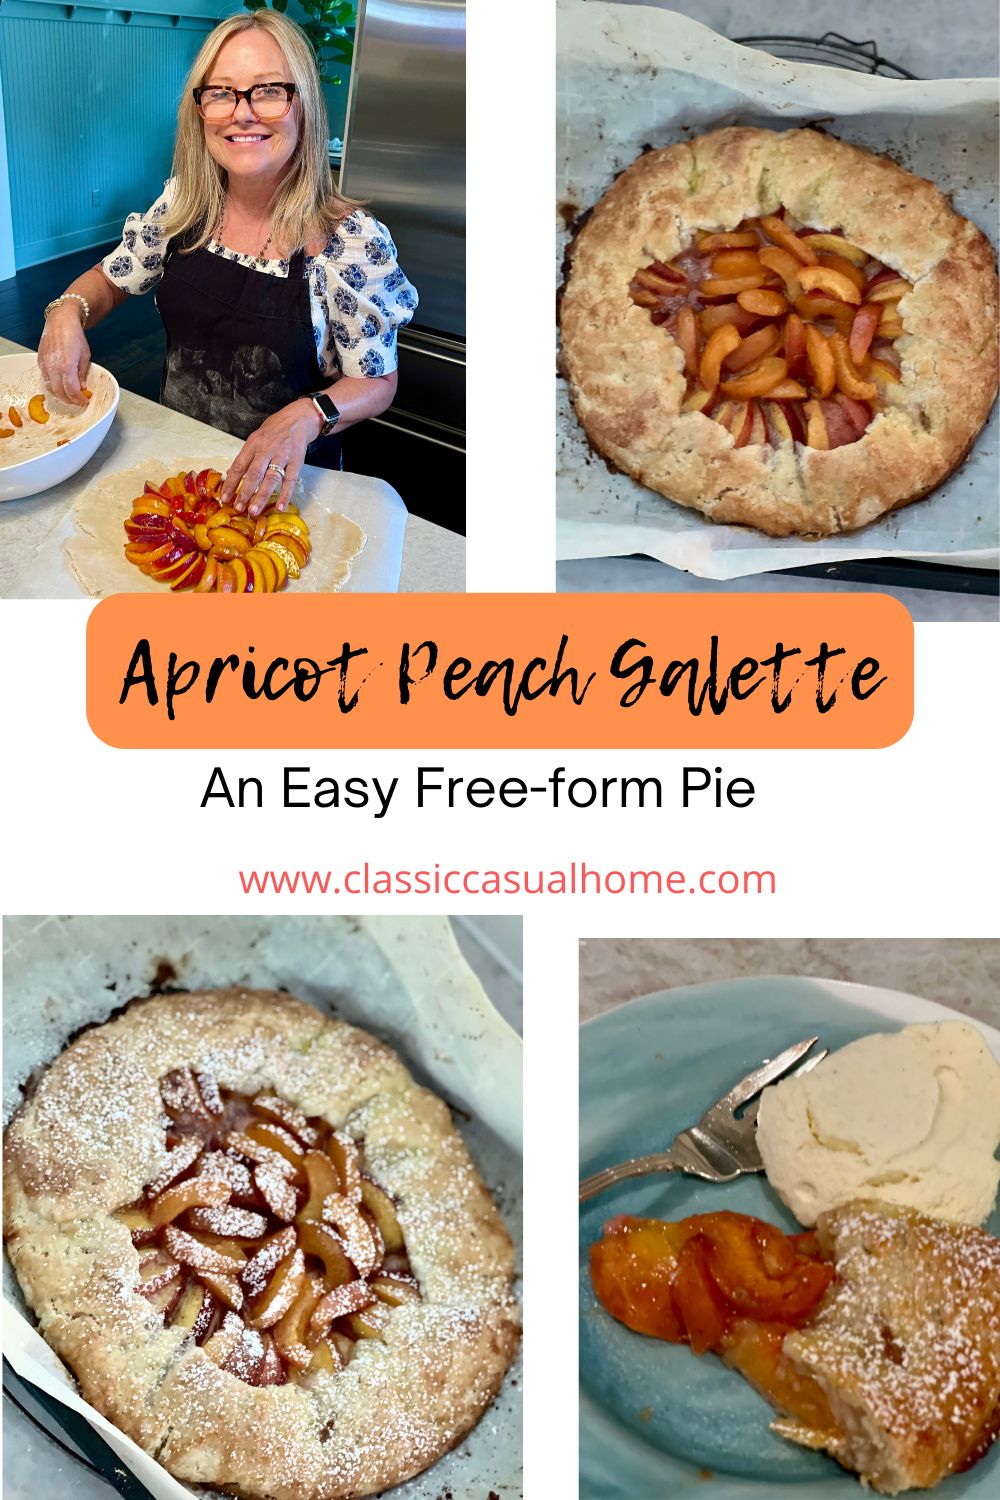 Dinner Party Ideas With Peaches like a peach and apricot galette for dessert